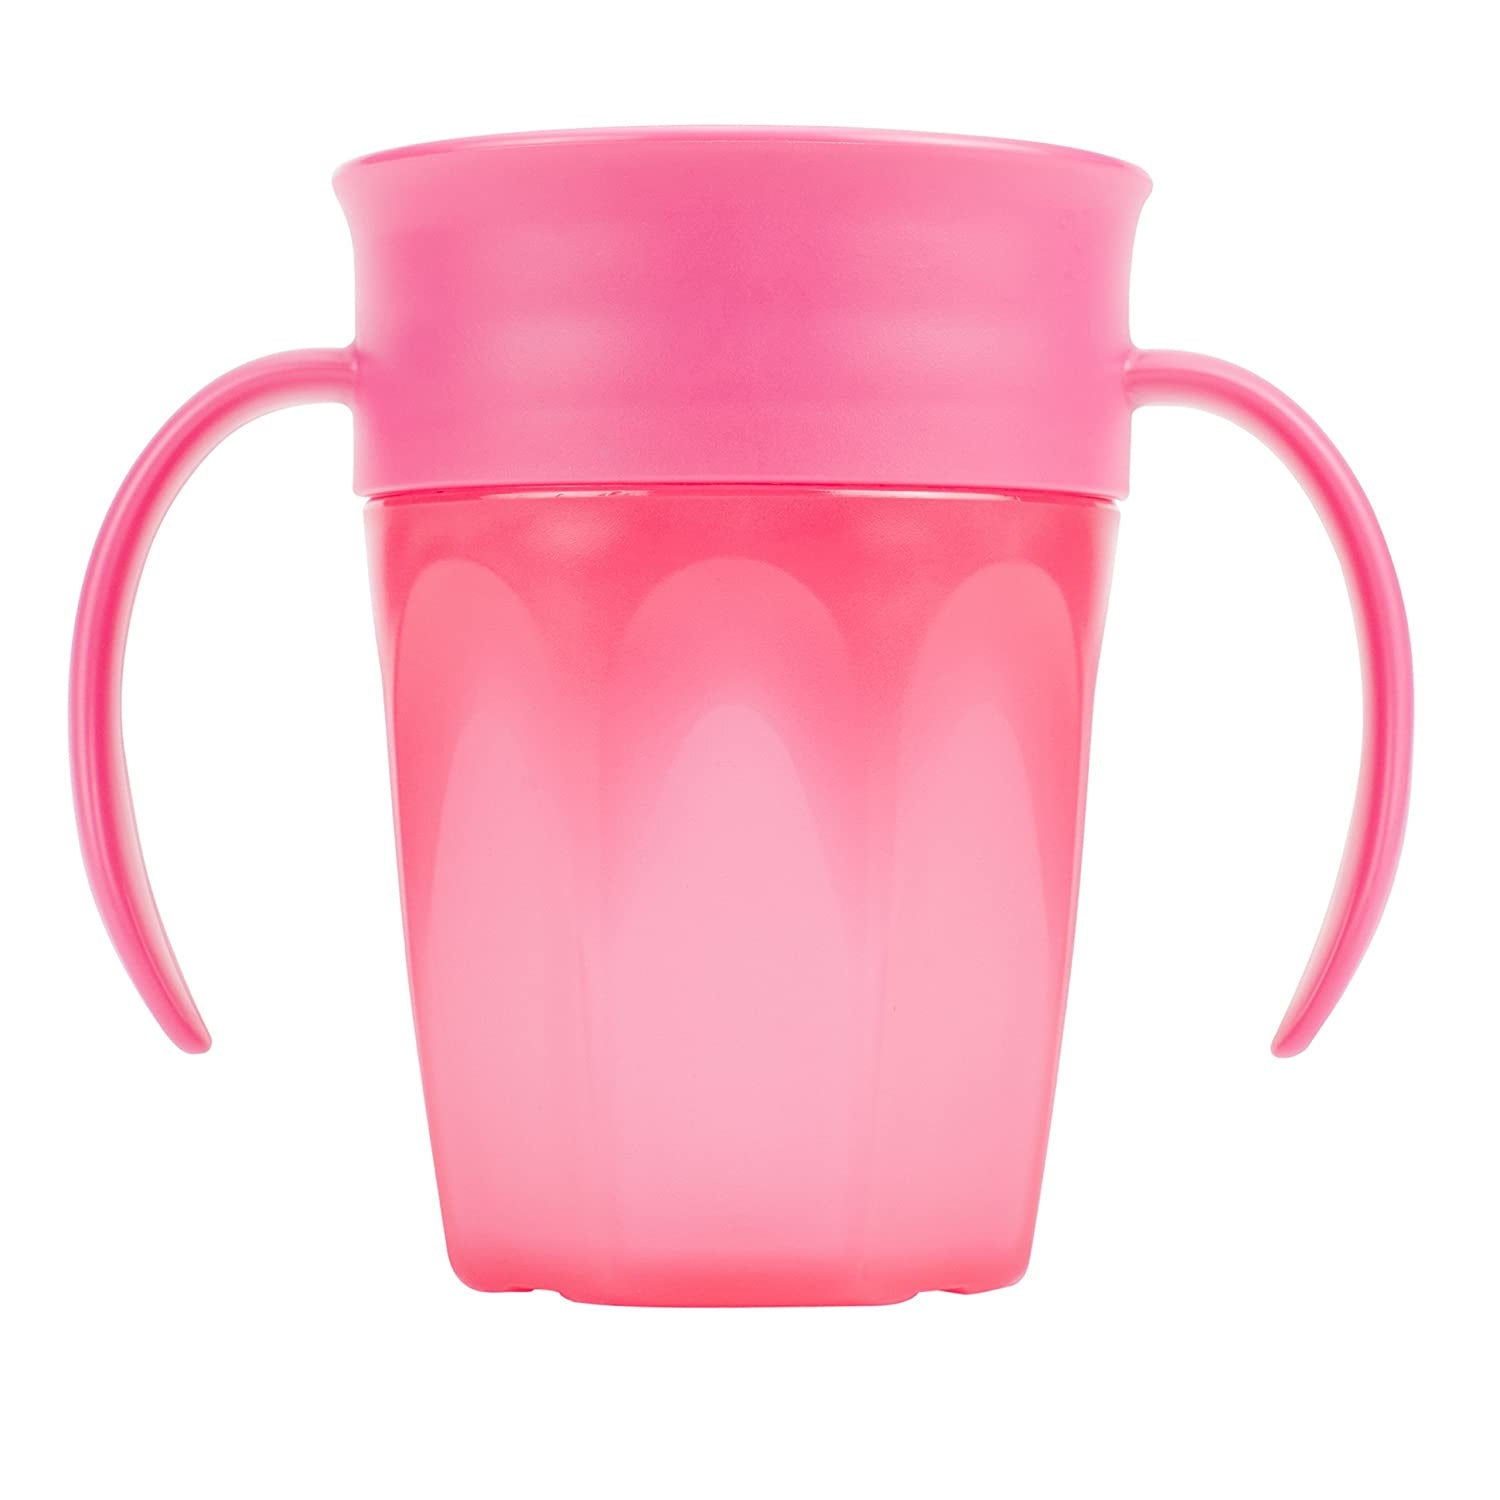 Munchkin Miracle Cup, 360 Degrees, 7 Ounce, 6 M+ - 2 cups